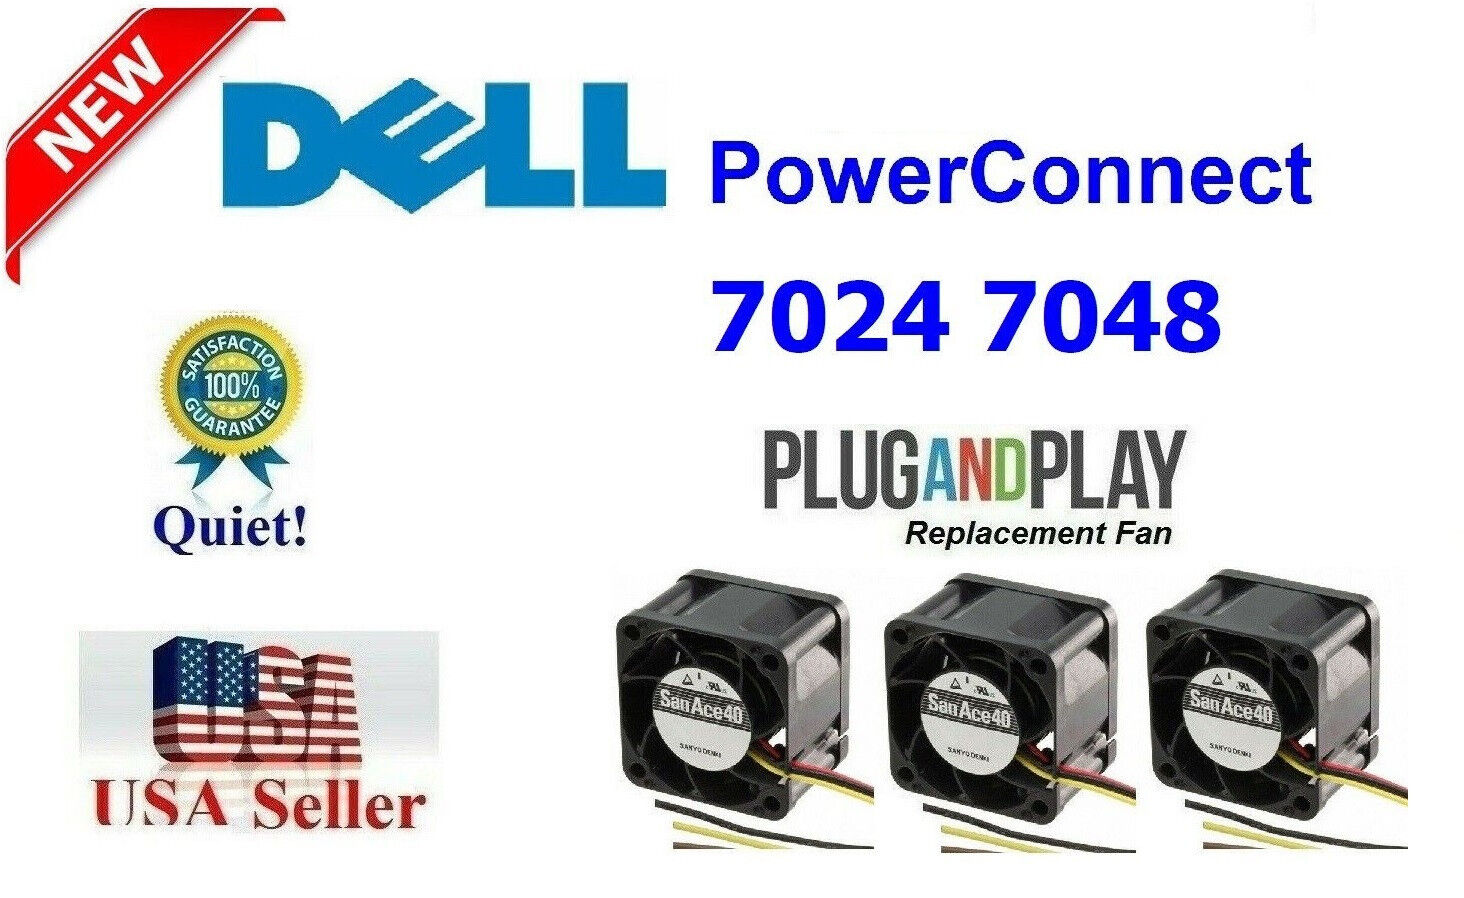 Pack of 3x Quiet version Plug-and-Play fans for Dell PowerConnect 7024 7048